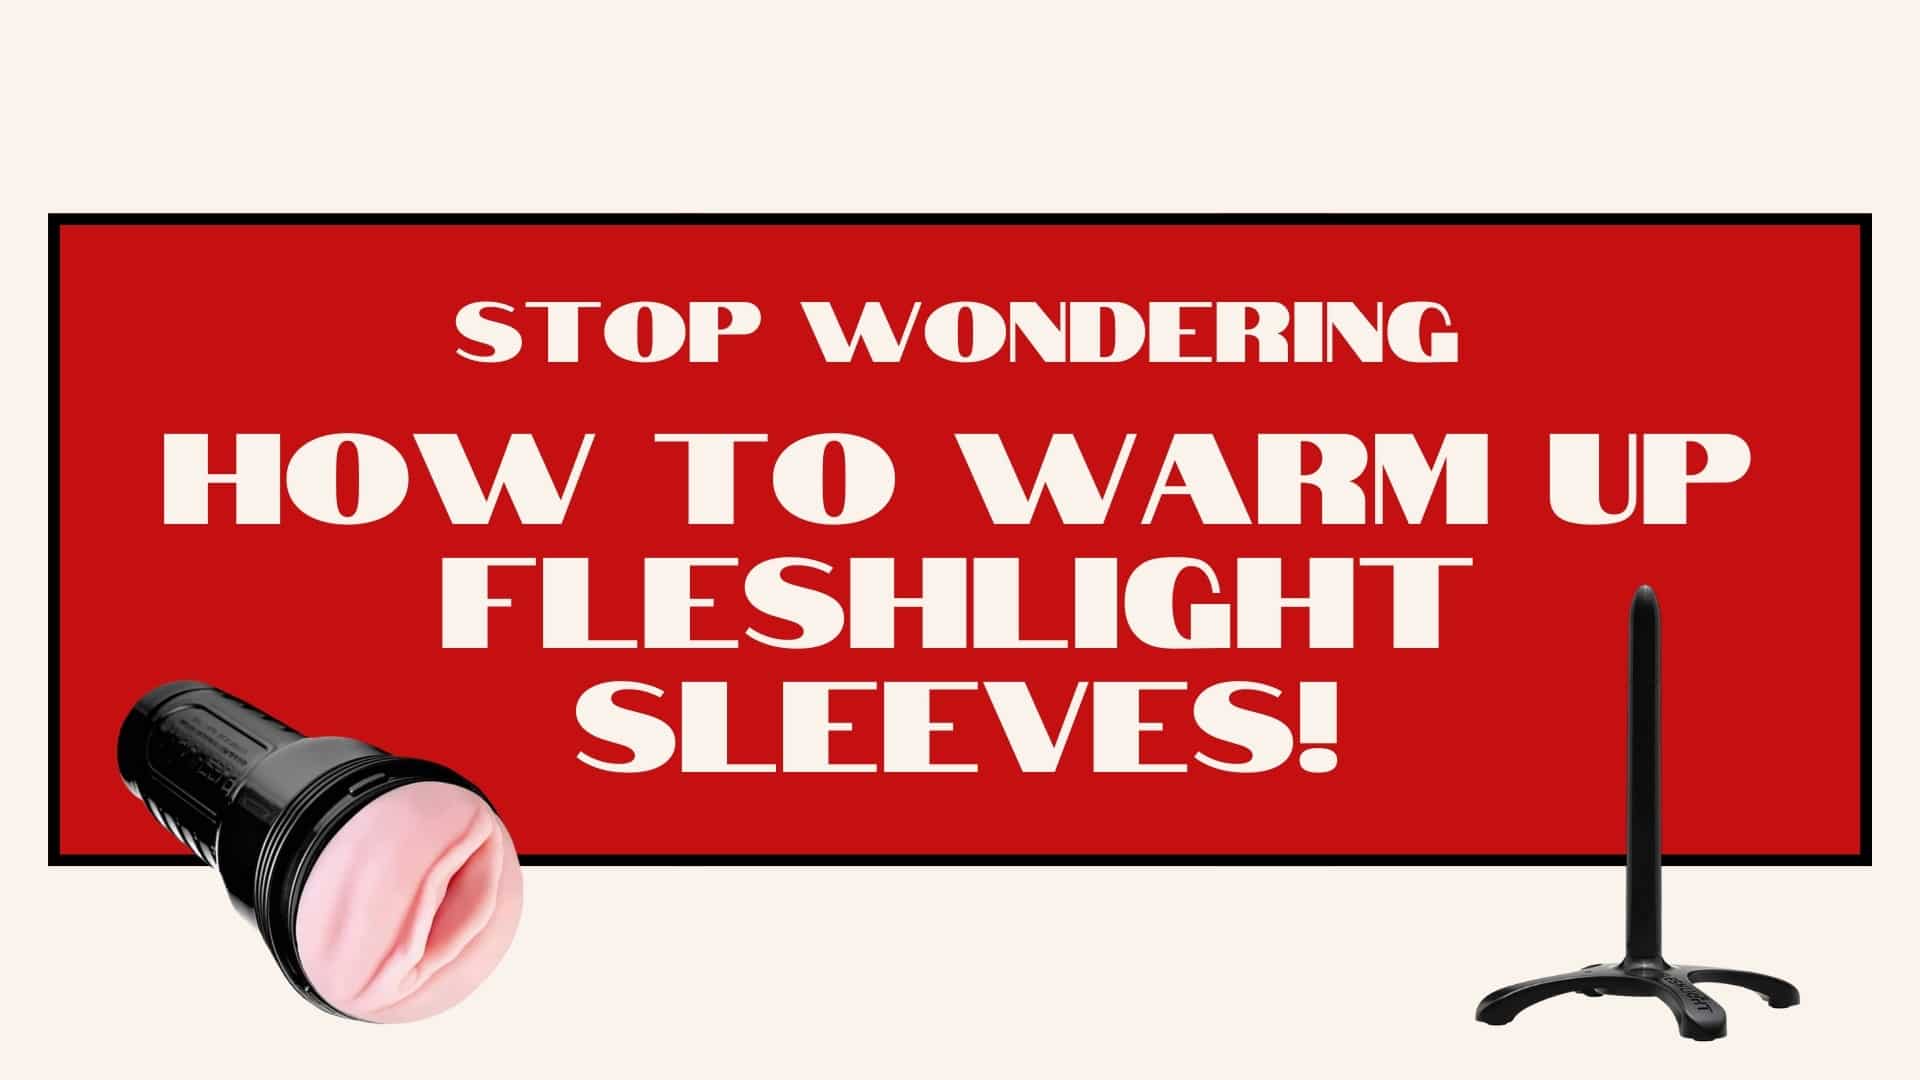 cristen hayes recommends warming up a fleshlight pic